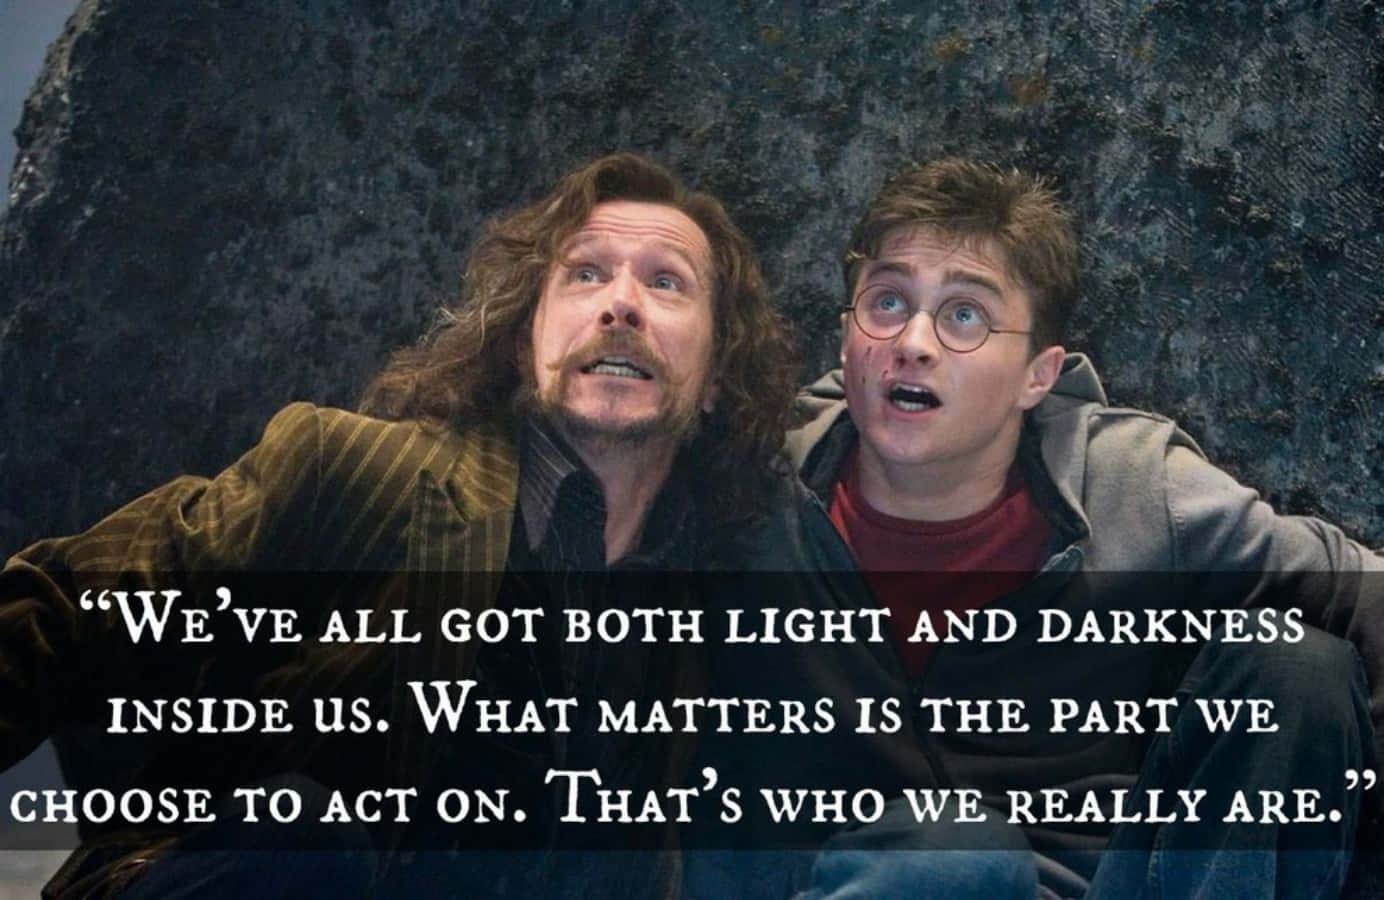 Inspirational Harry Potter Quote on a Magical Background Wallpaper